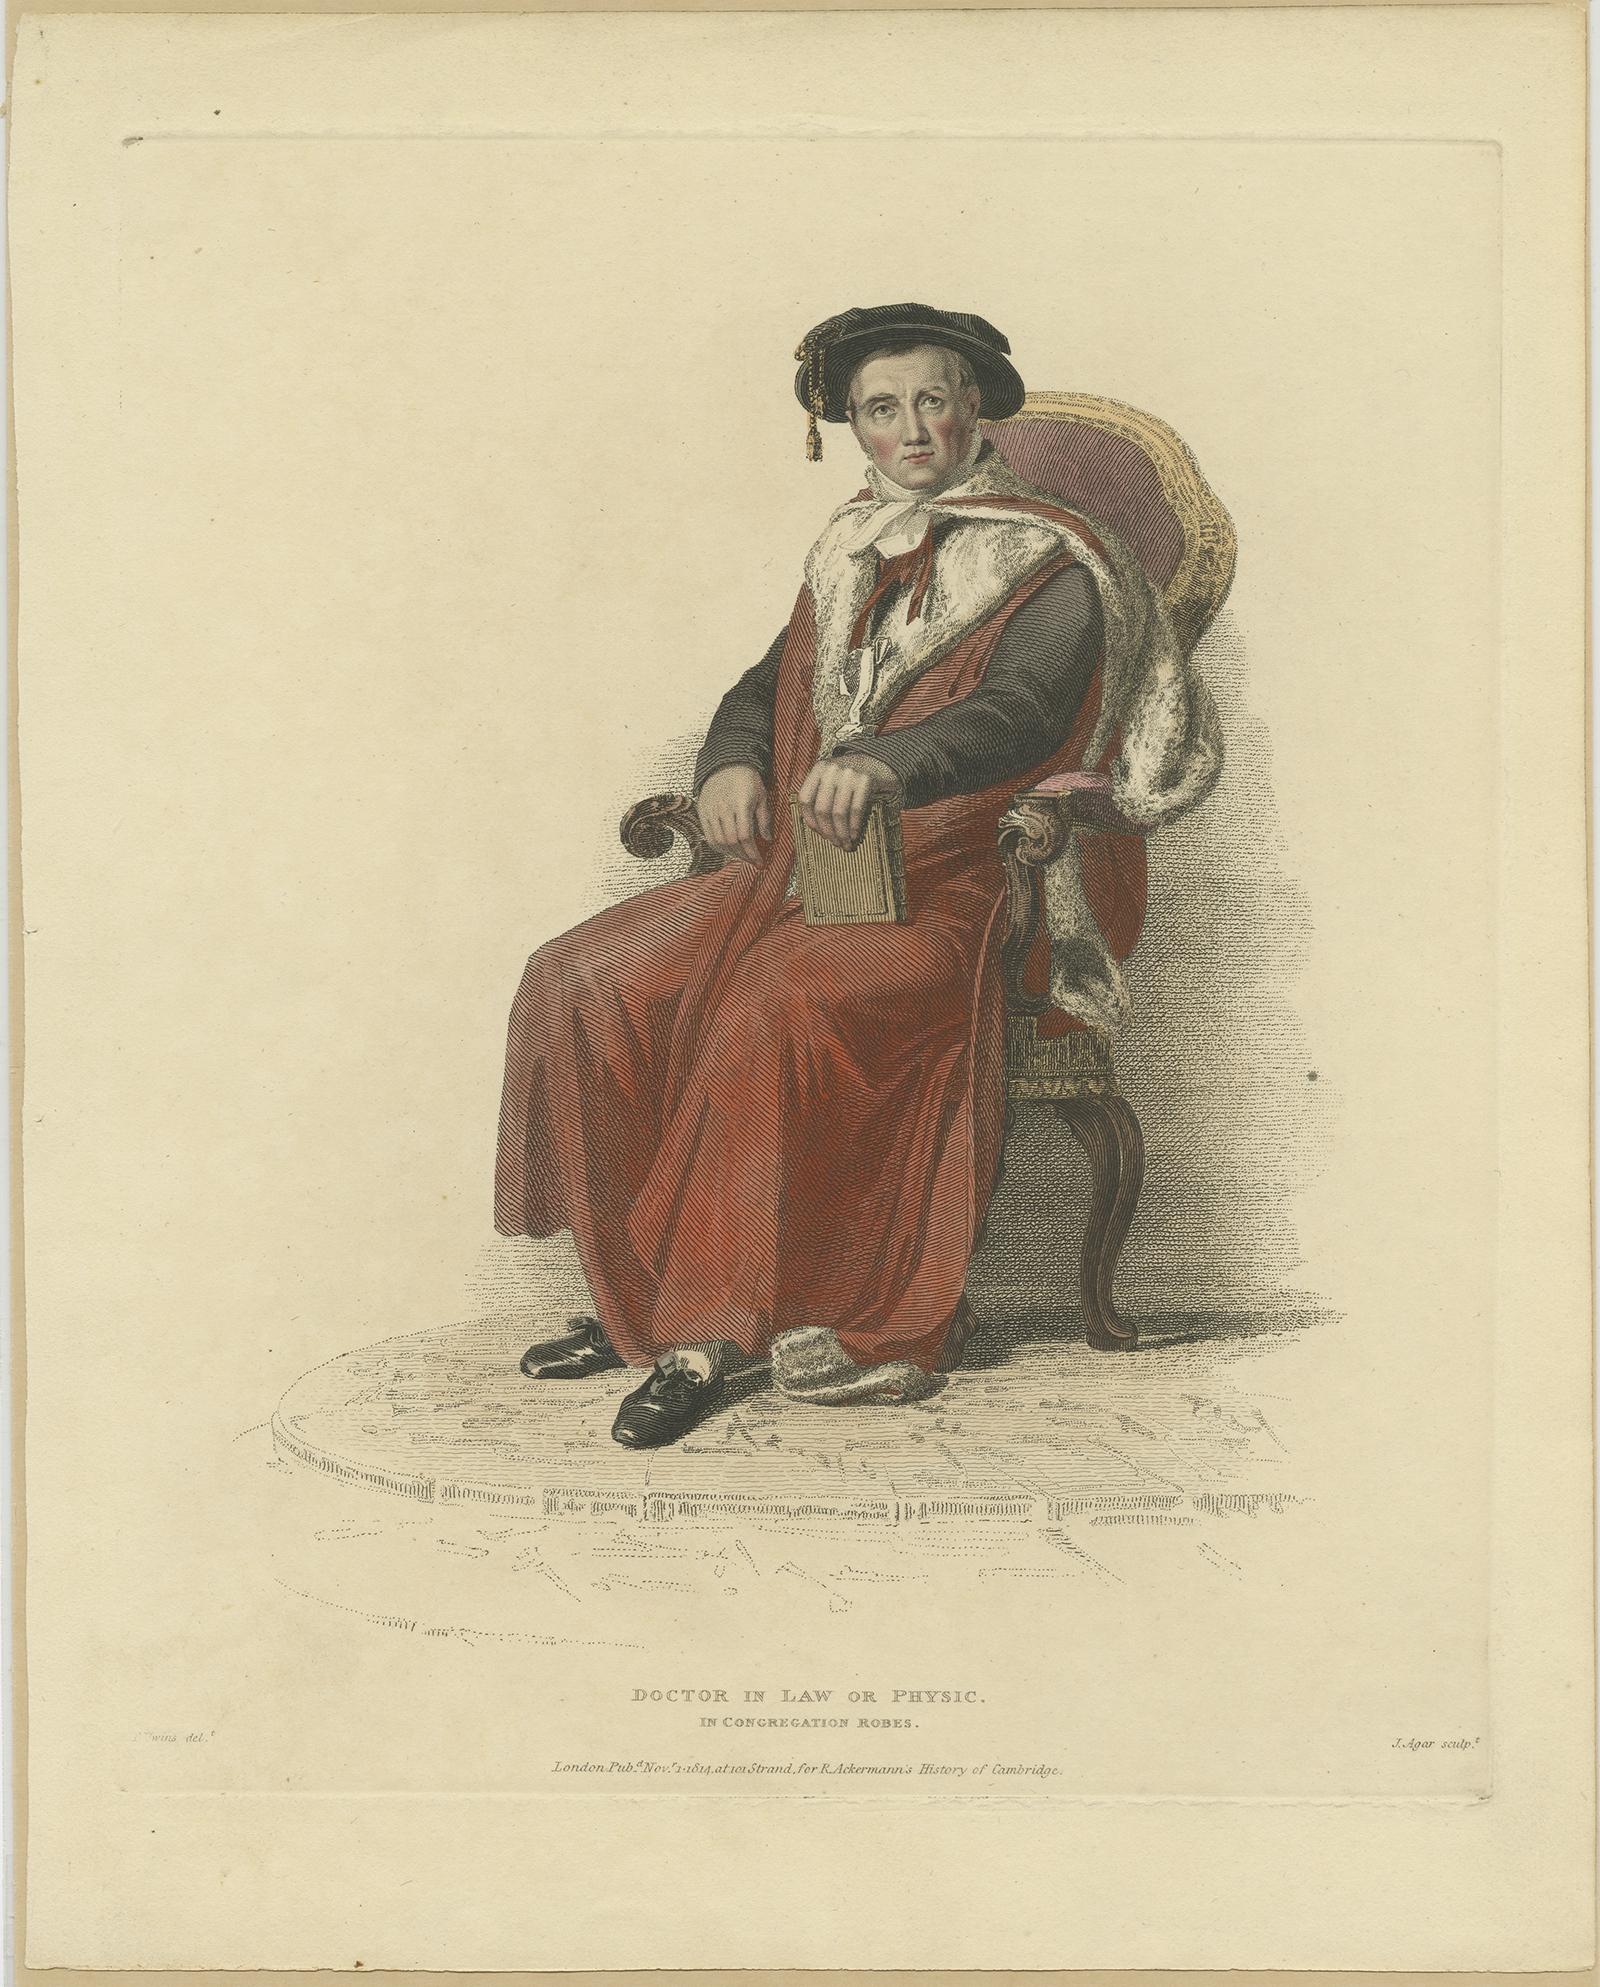 Antique print titled 'Doctor in Law or Physic, in congregation robes'. Portrait of Dr E.D. Clark made after a drawing by Thomas Uwins. This print originates from 'Ackermann's History of Oxford and History of Cambridge'. 

Artists and Engravers: